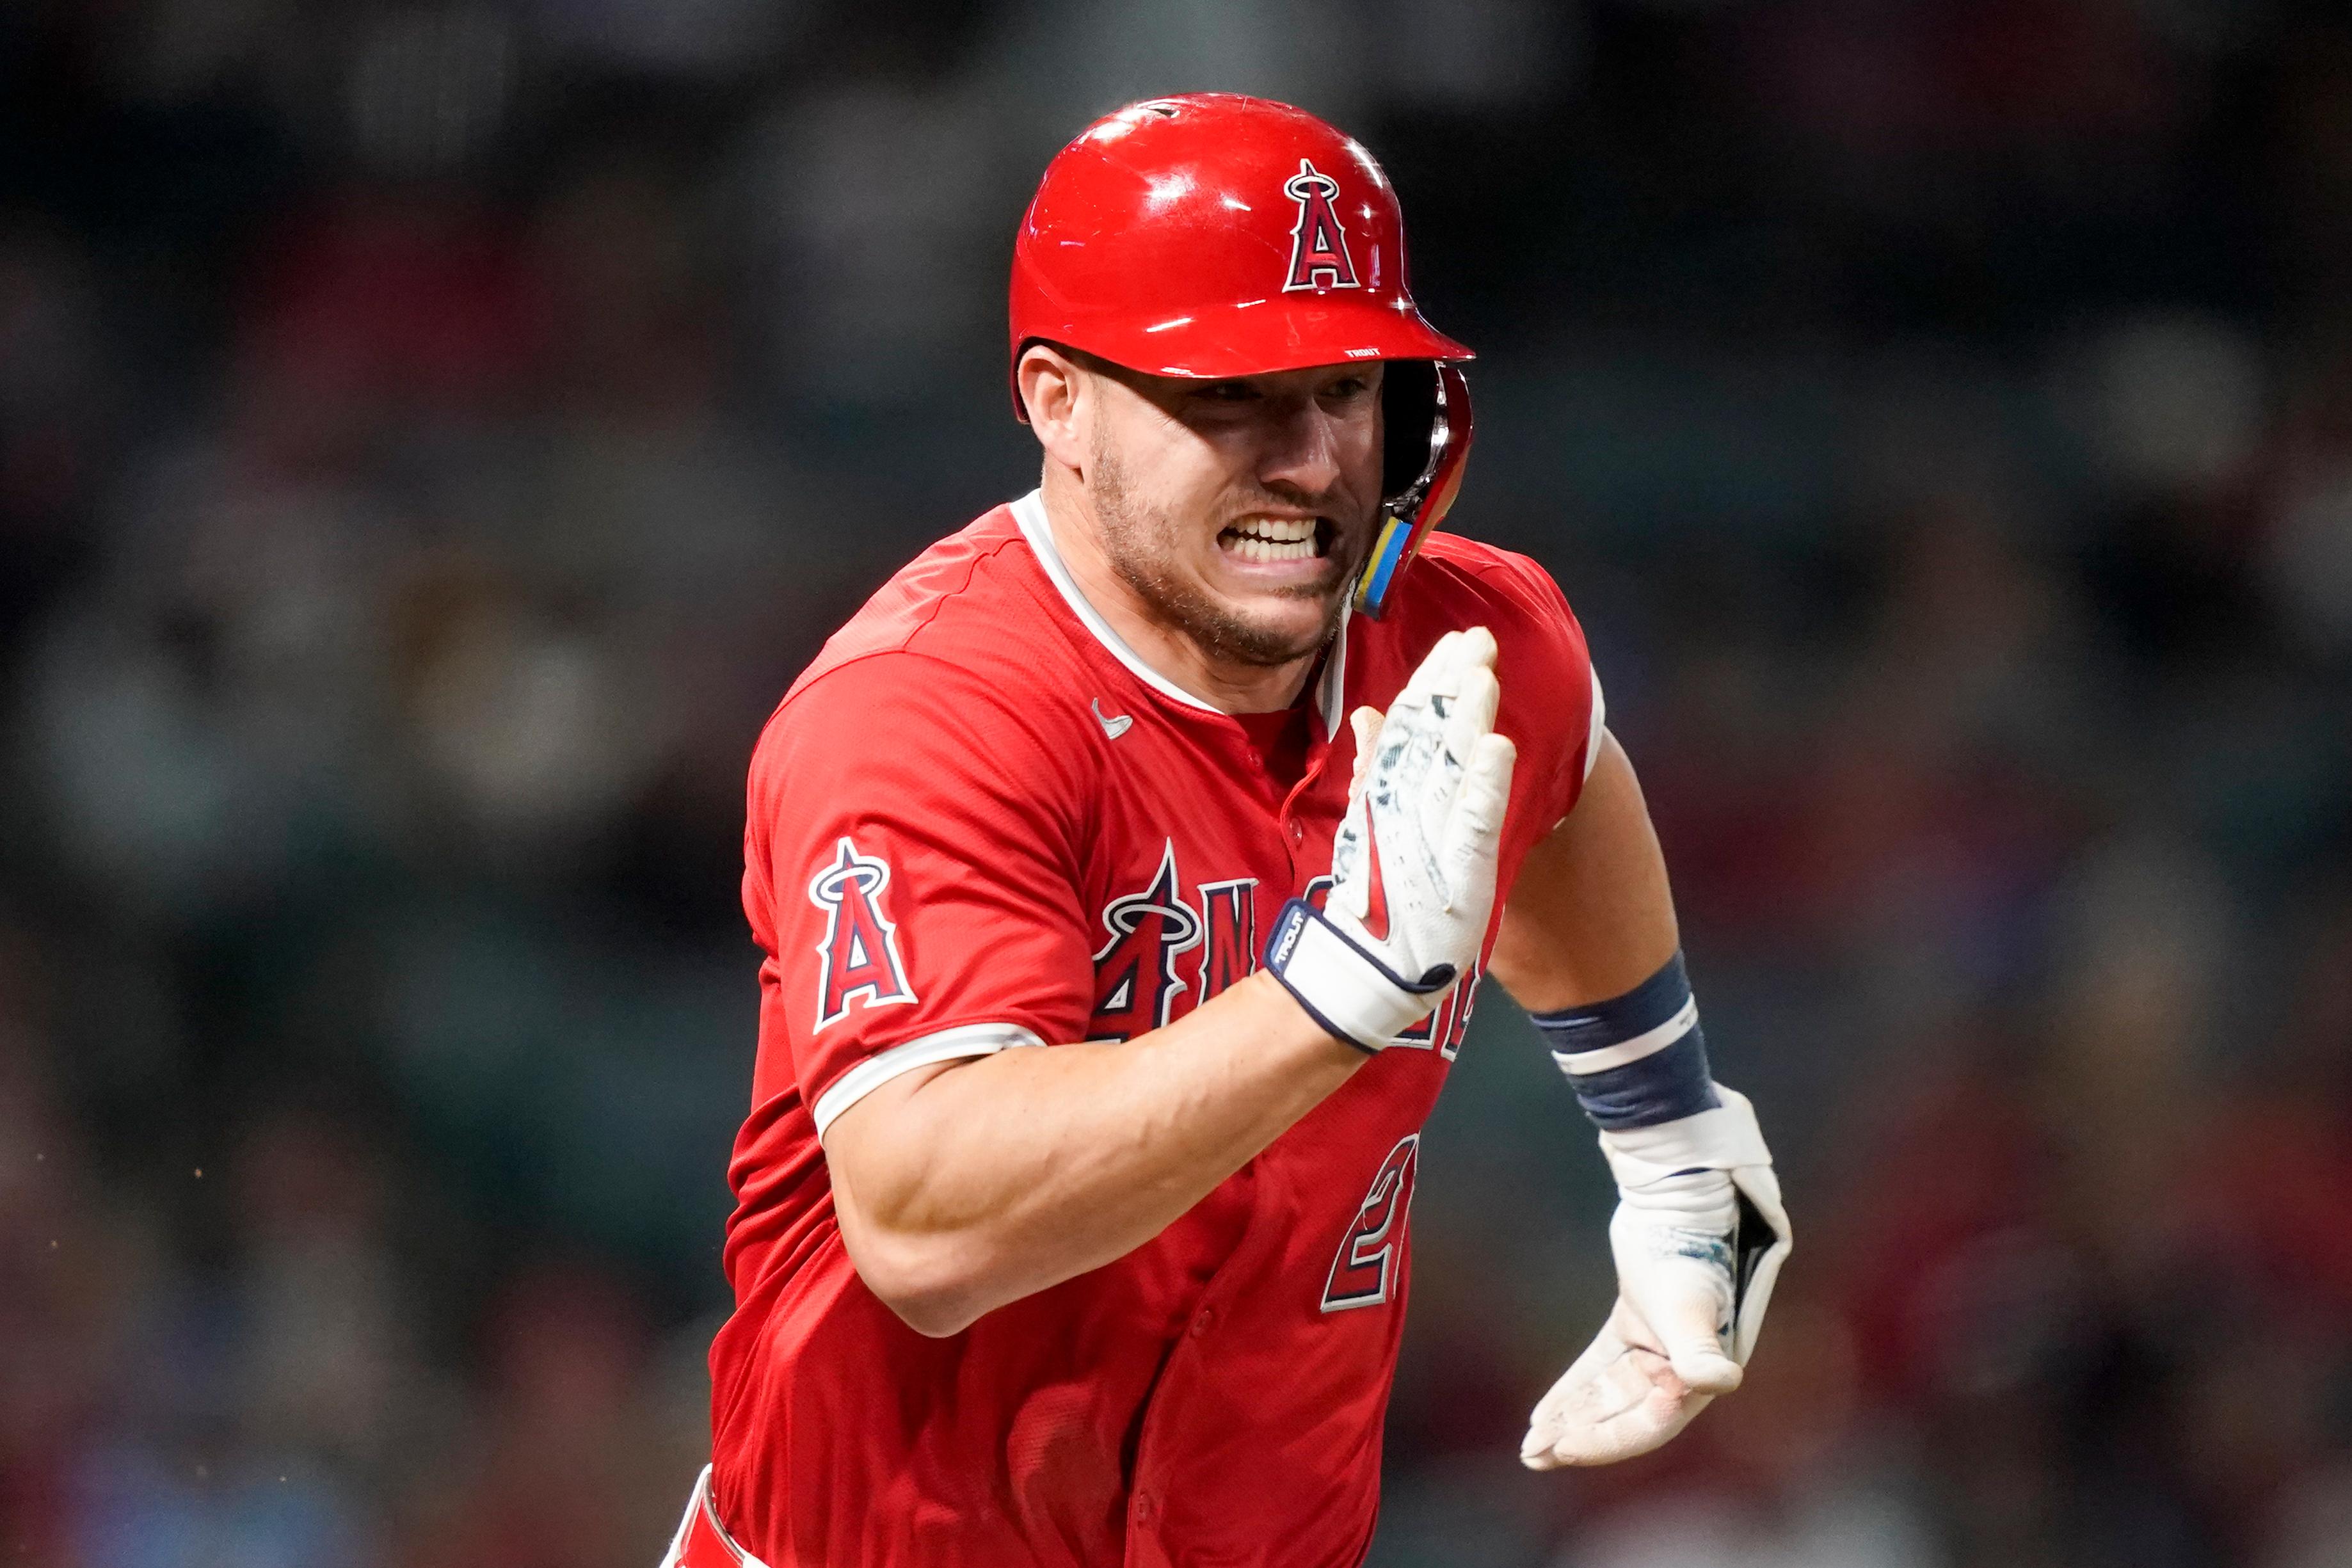 Angels’ Trout Chose Knee Surgery Over Spending Painful Season as a DH